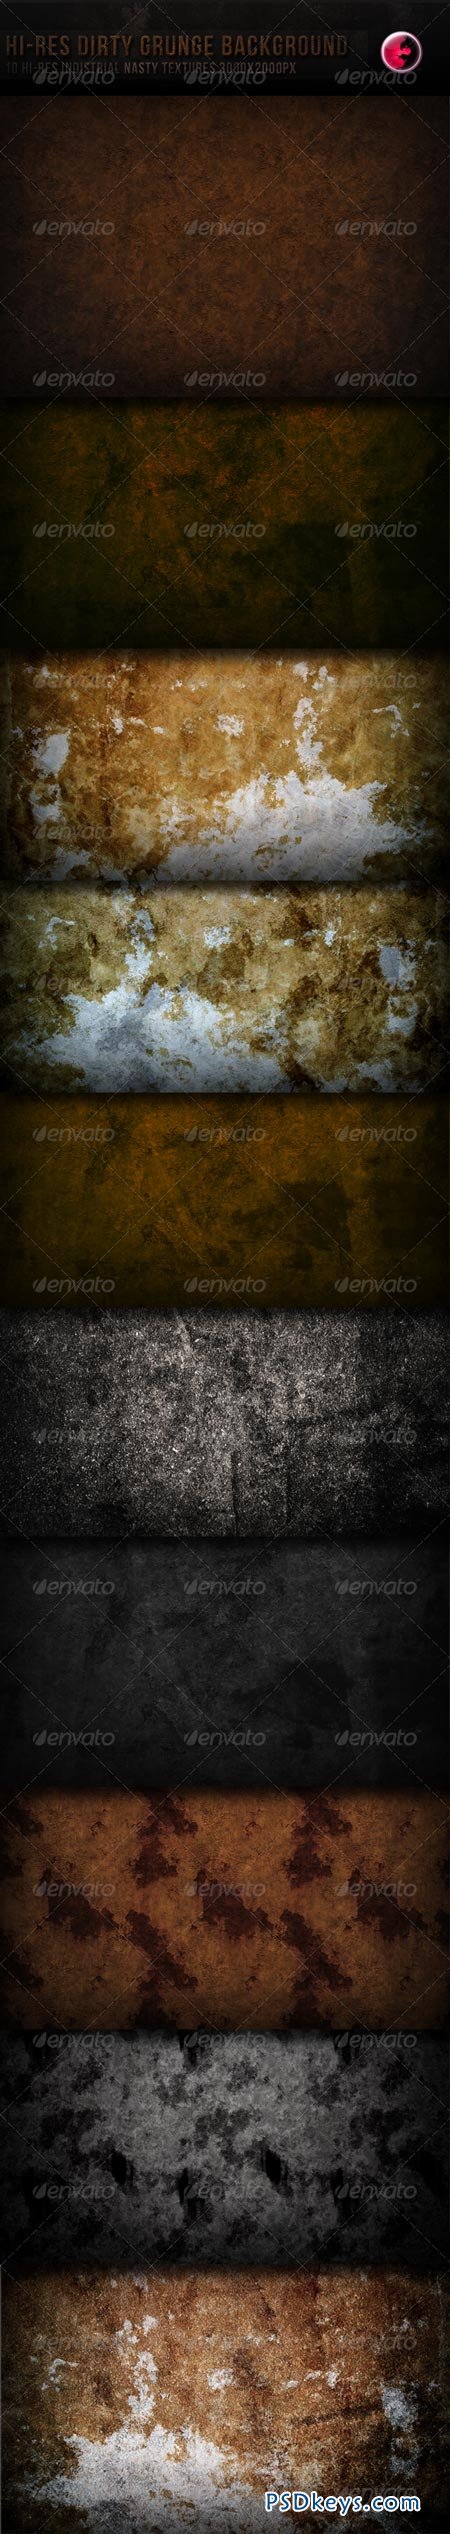 10 Hi-res Dirty Grunge TeXture Background 163827